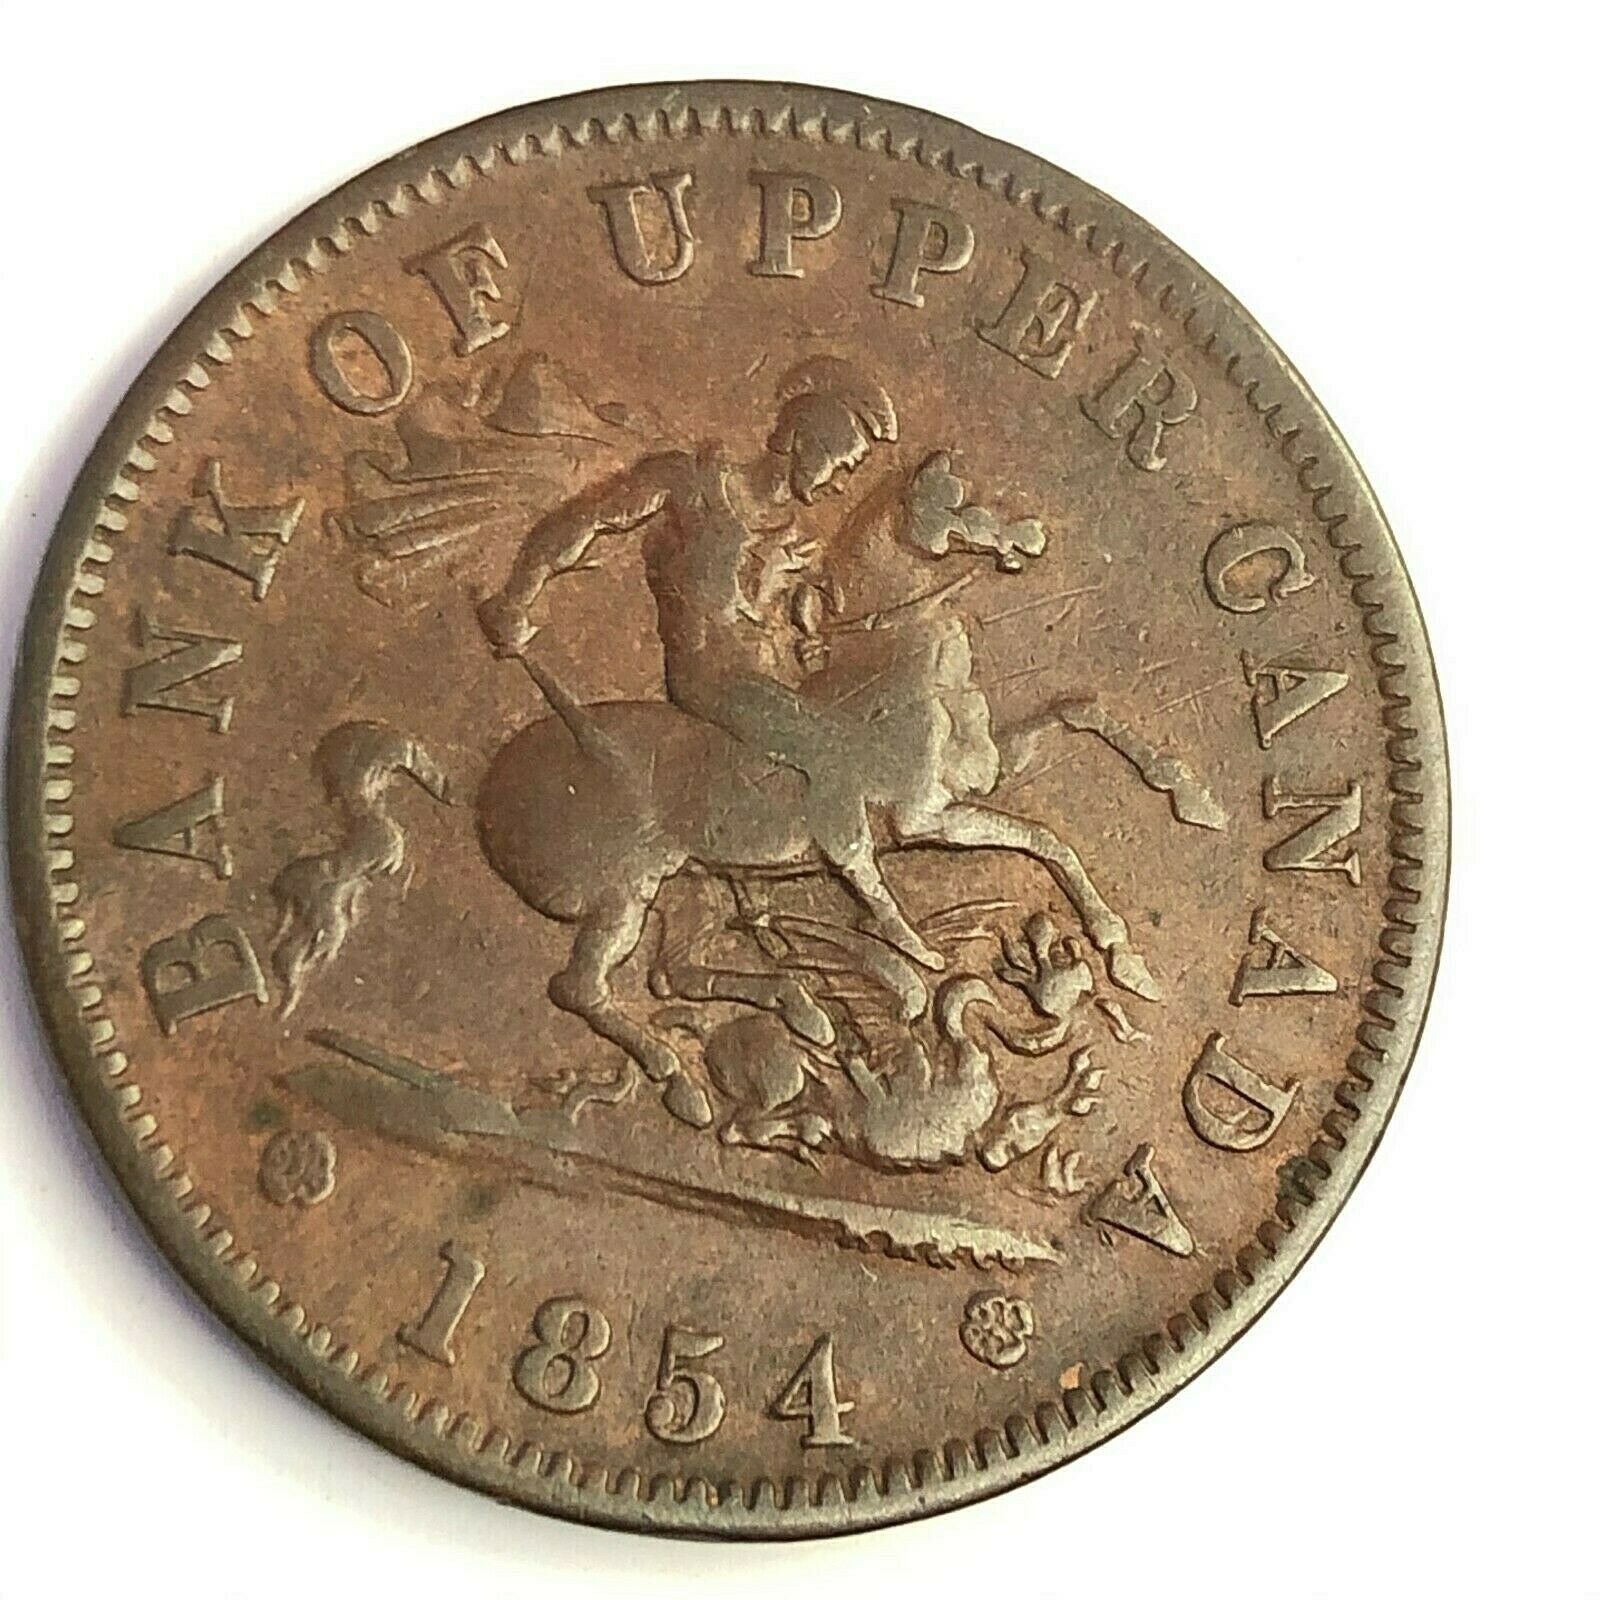 1854 Bank Of Upper Canada One Penny, St George & Dragon Token, Km#tn3